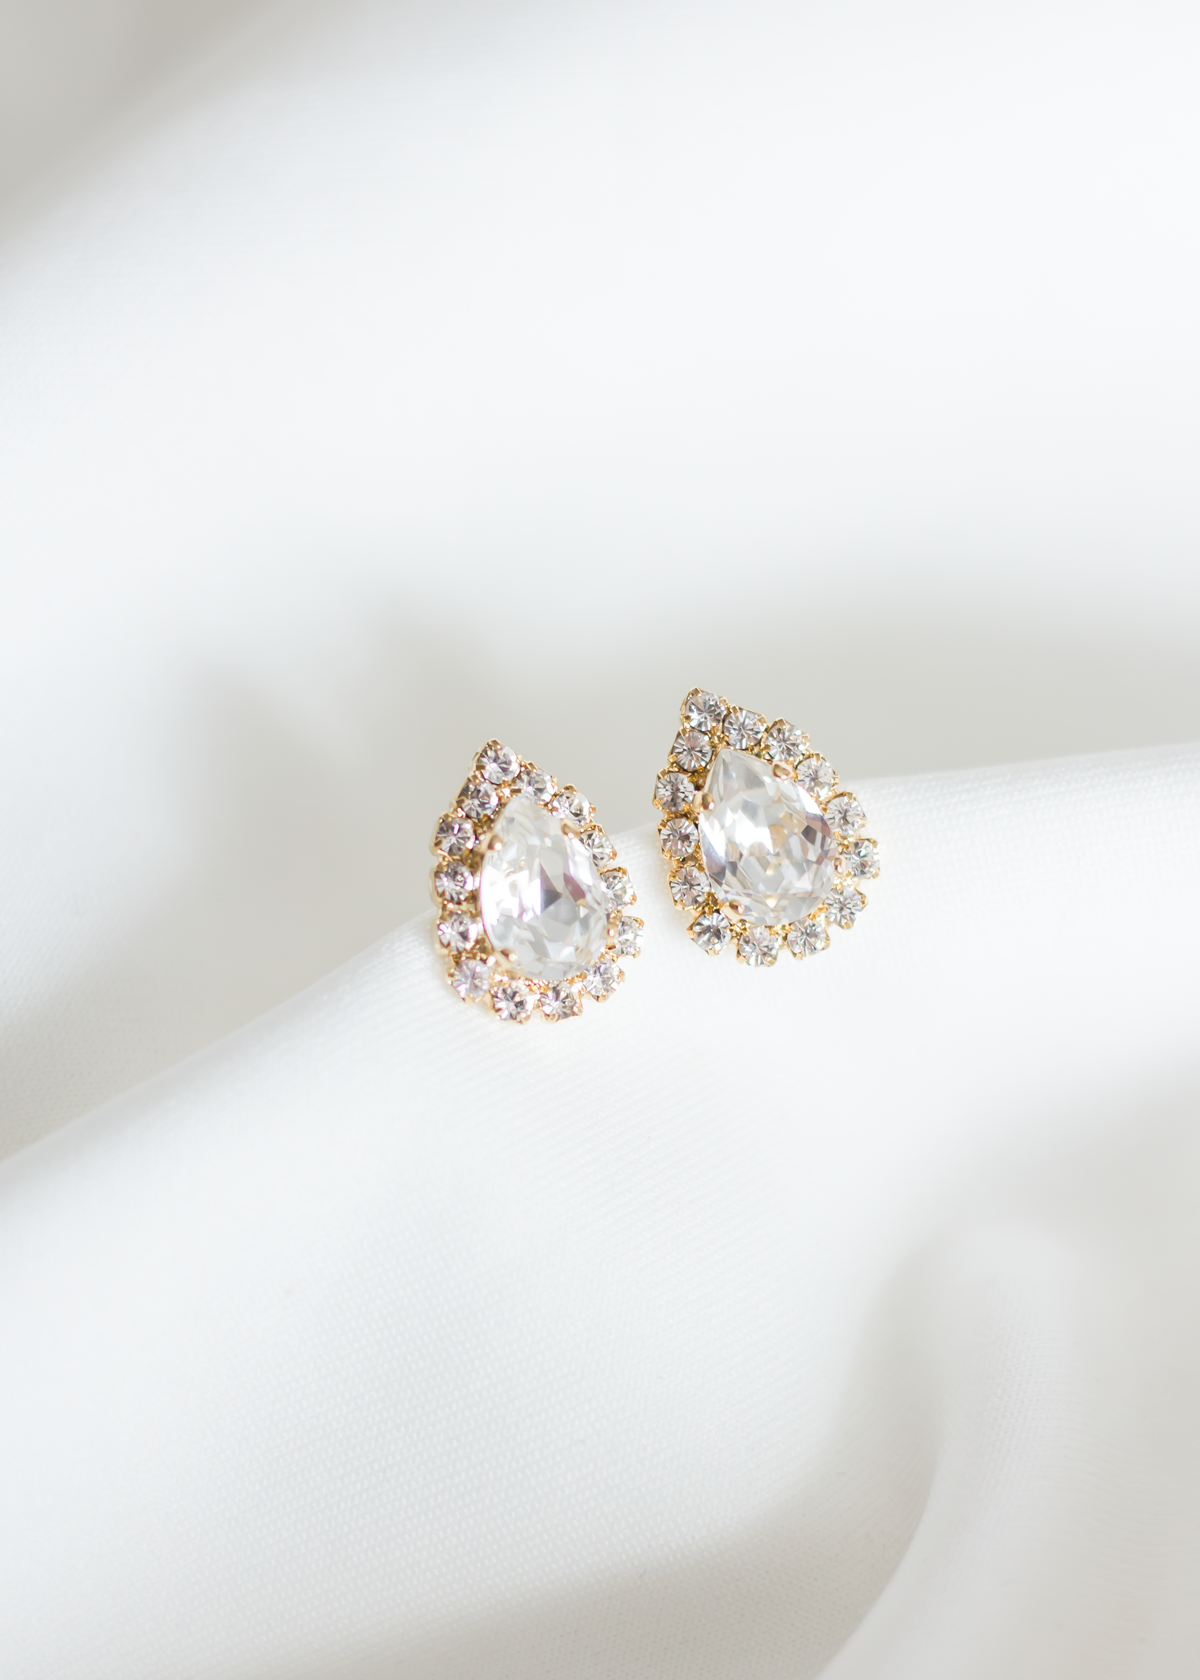 The Sparkling Cinderella Earrings